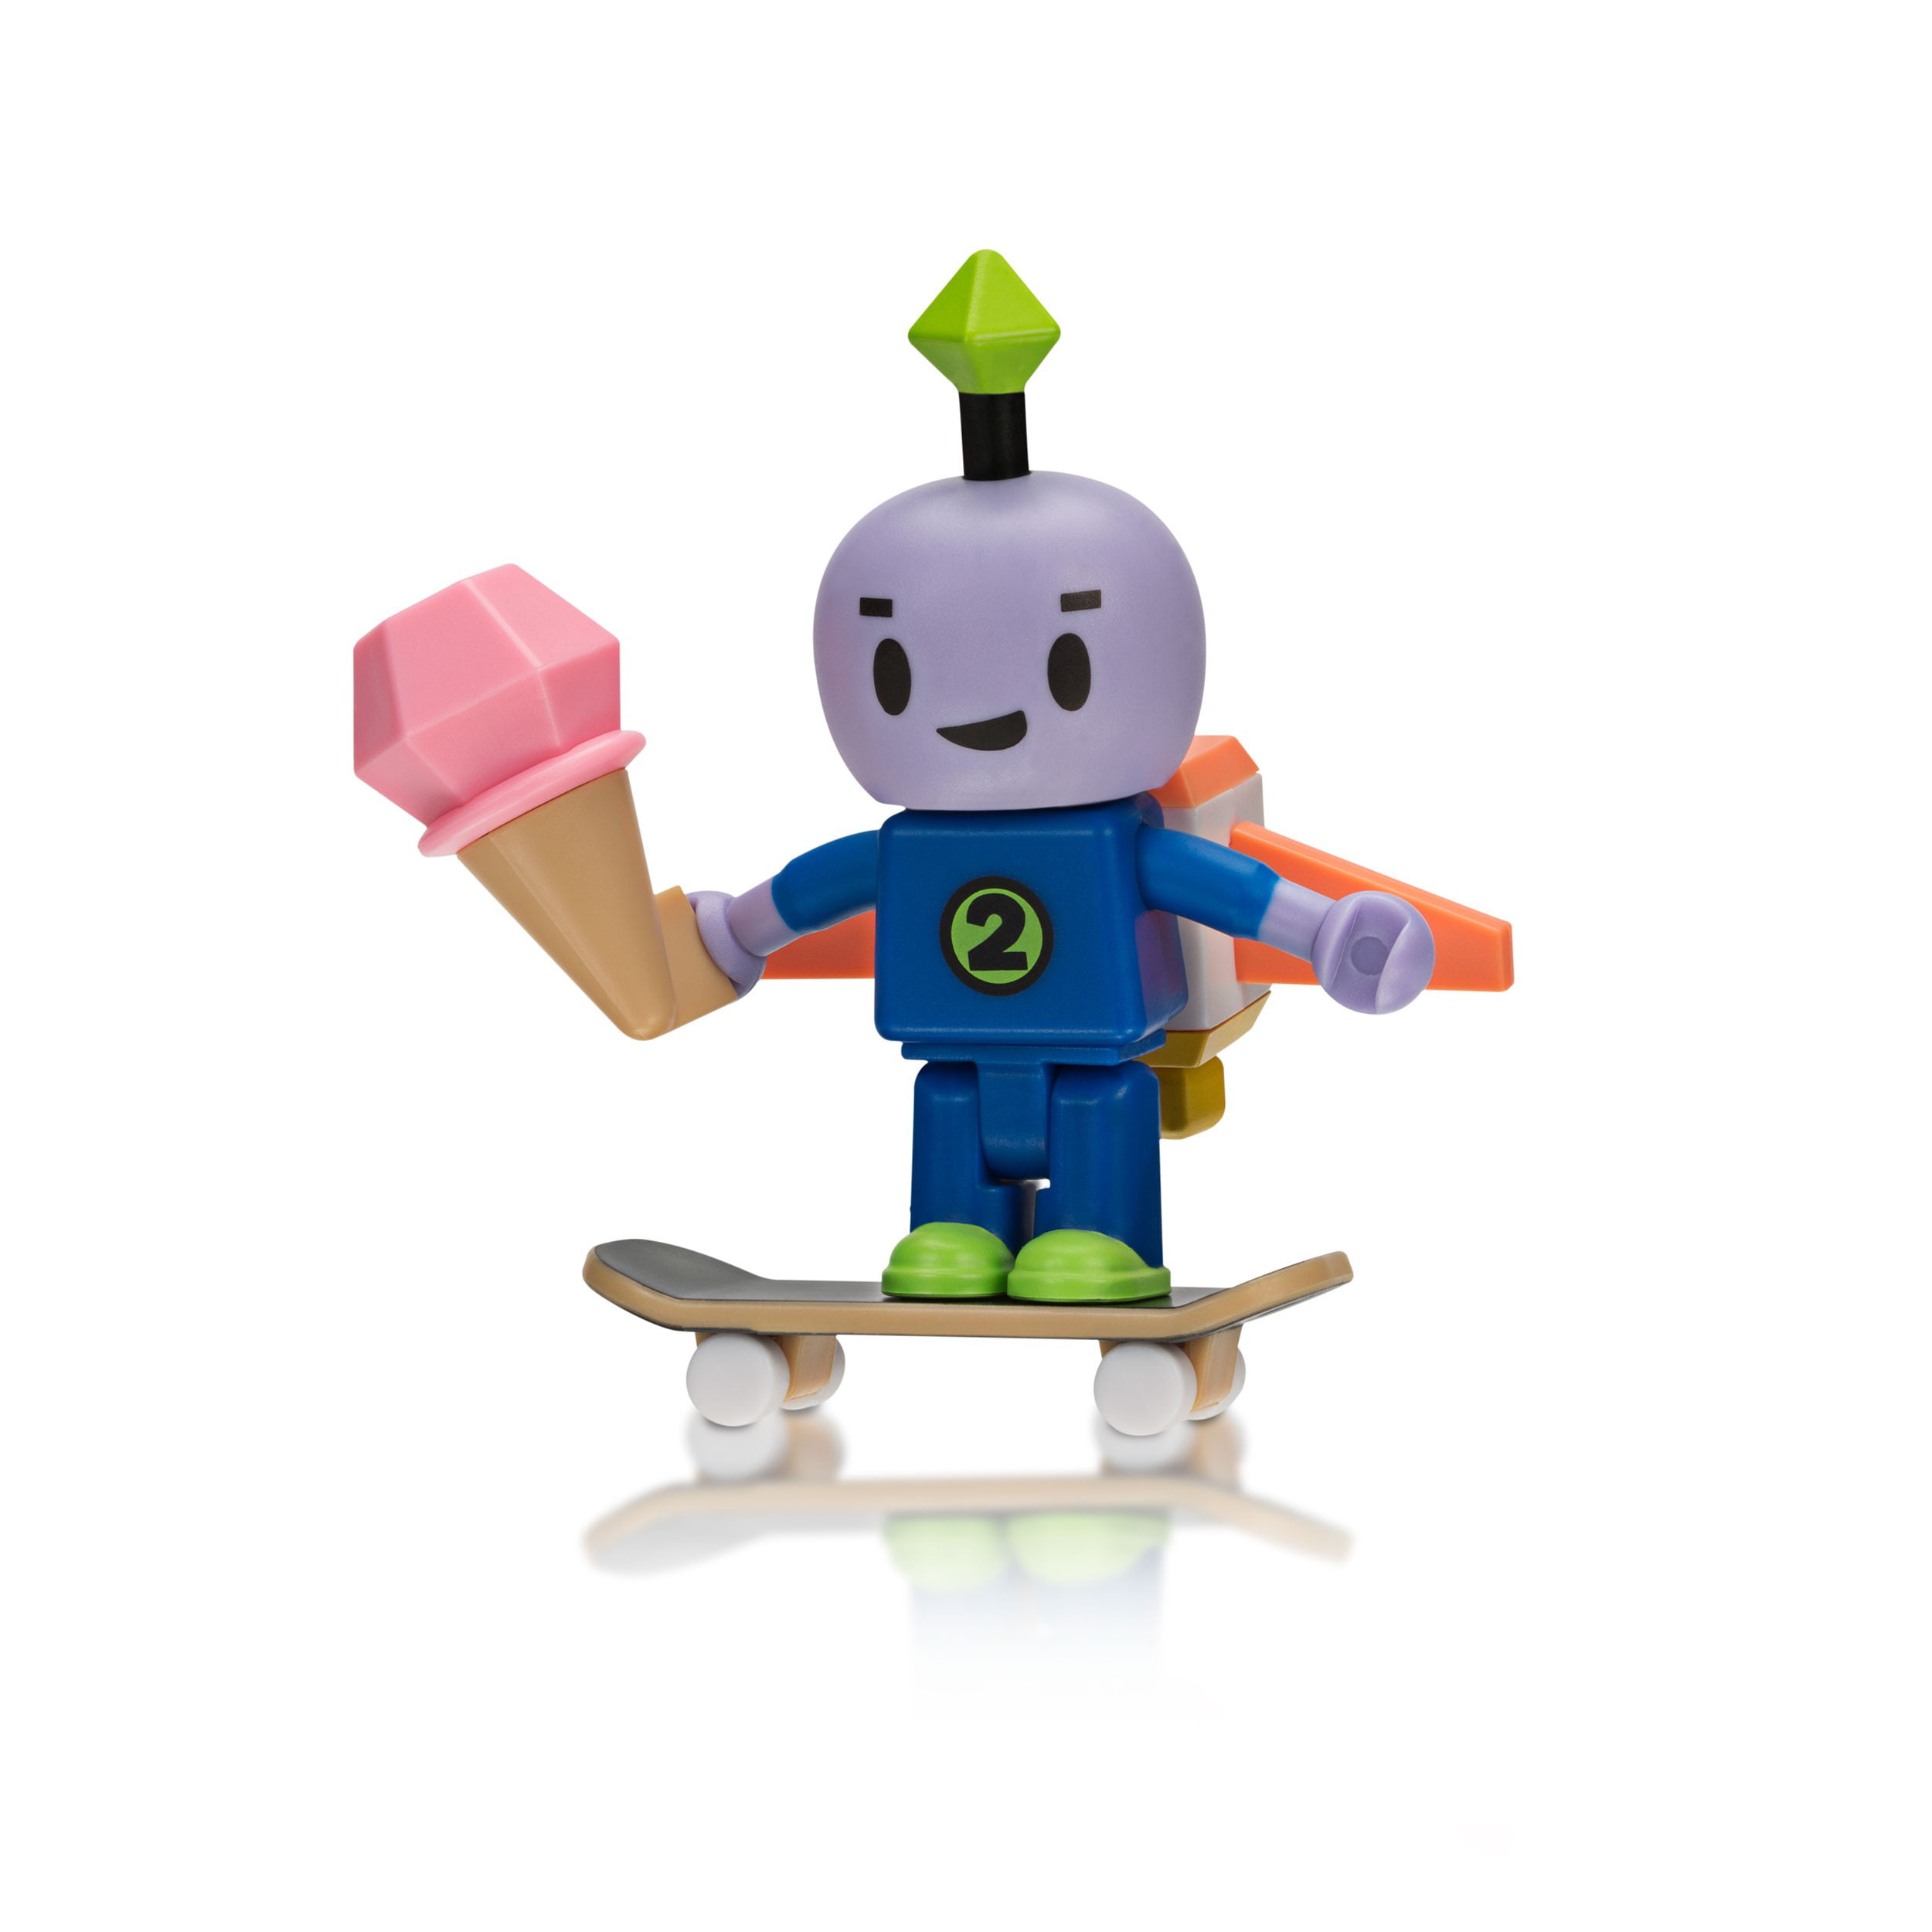 Roblox Cleaning Simulator Todd the Turnip 3in Figure Mint in Package